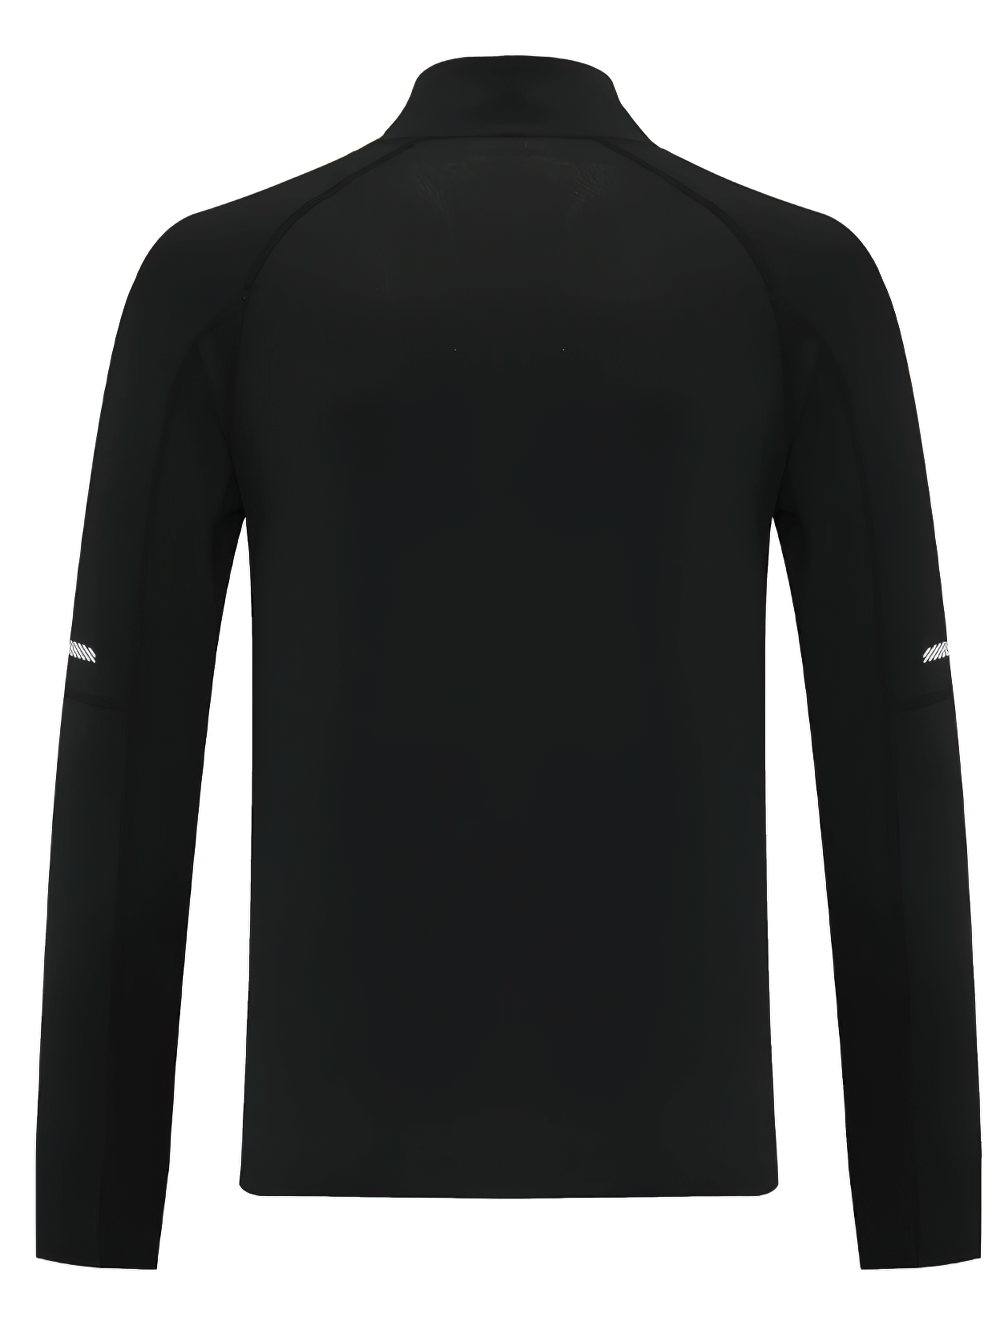 Athletic Zip-Up Male Top with Reflective Details - SF2077